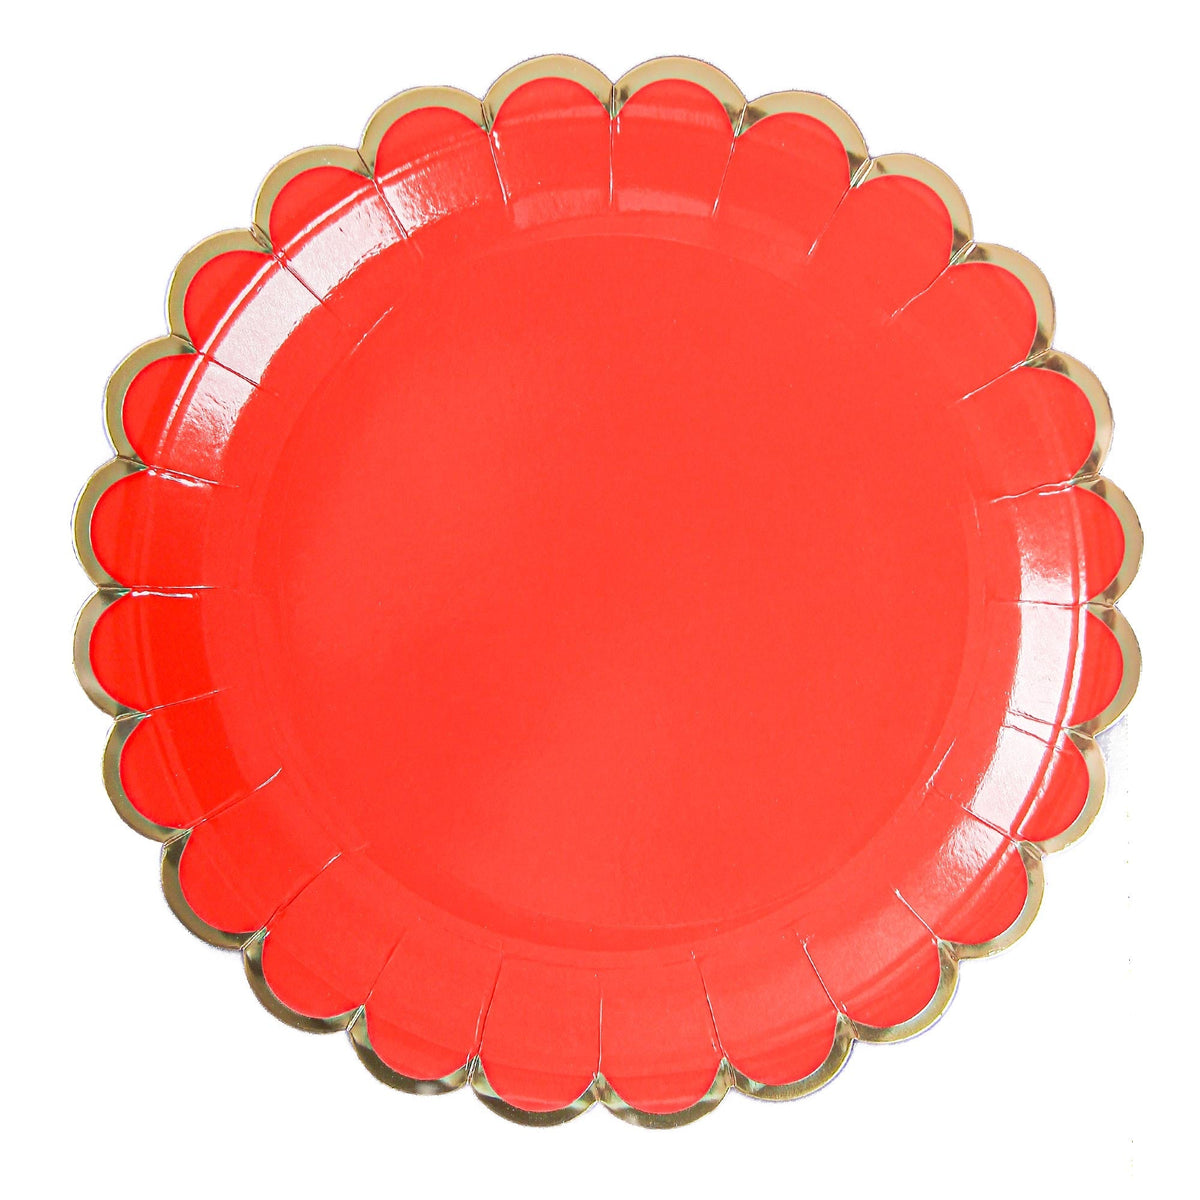 YIWU SANDY PAPER PRODUCTS CO., LTD Everyday Entertaining Red Flower Edge Large Lunch Paper Plates, 9 Inches, 8 Count